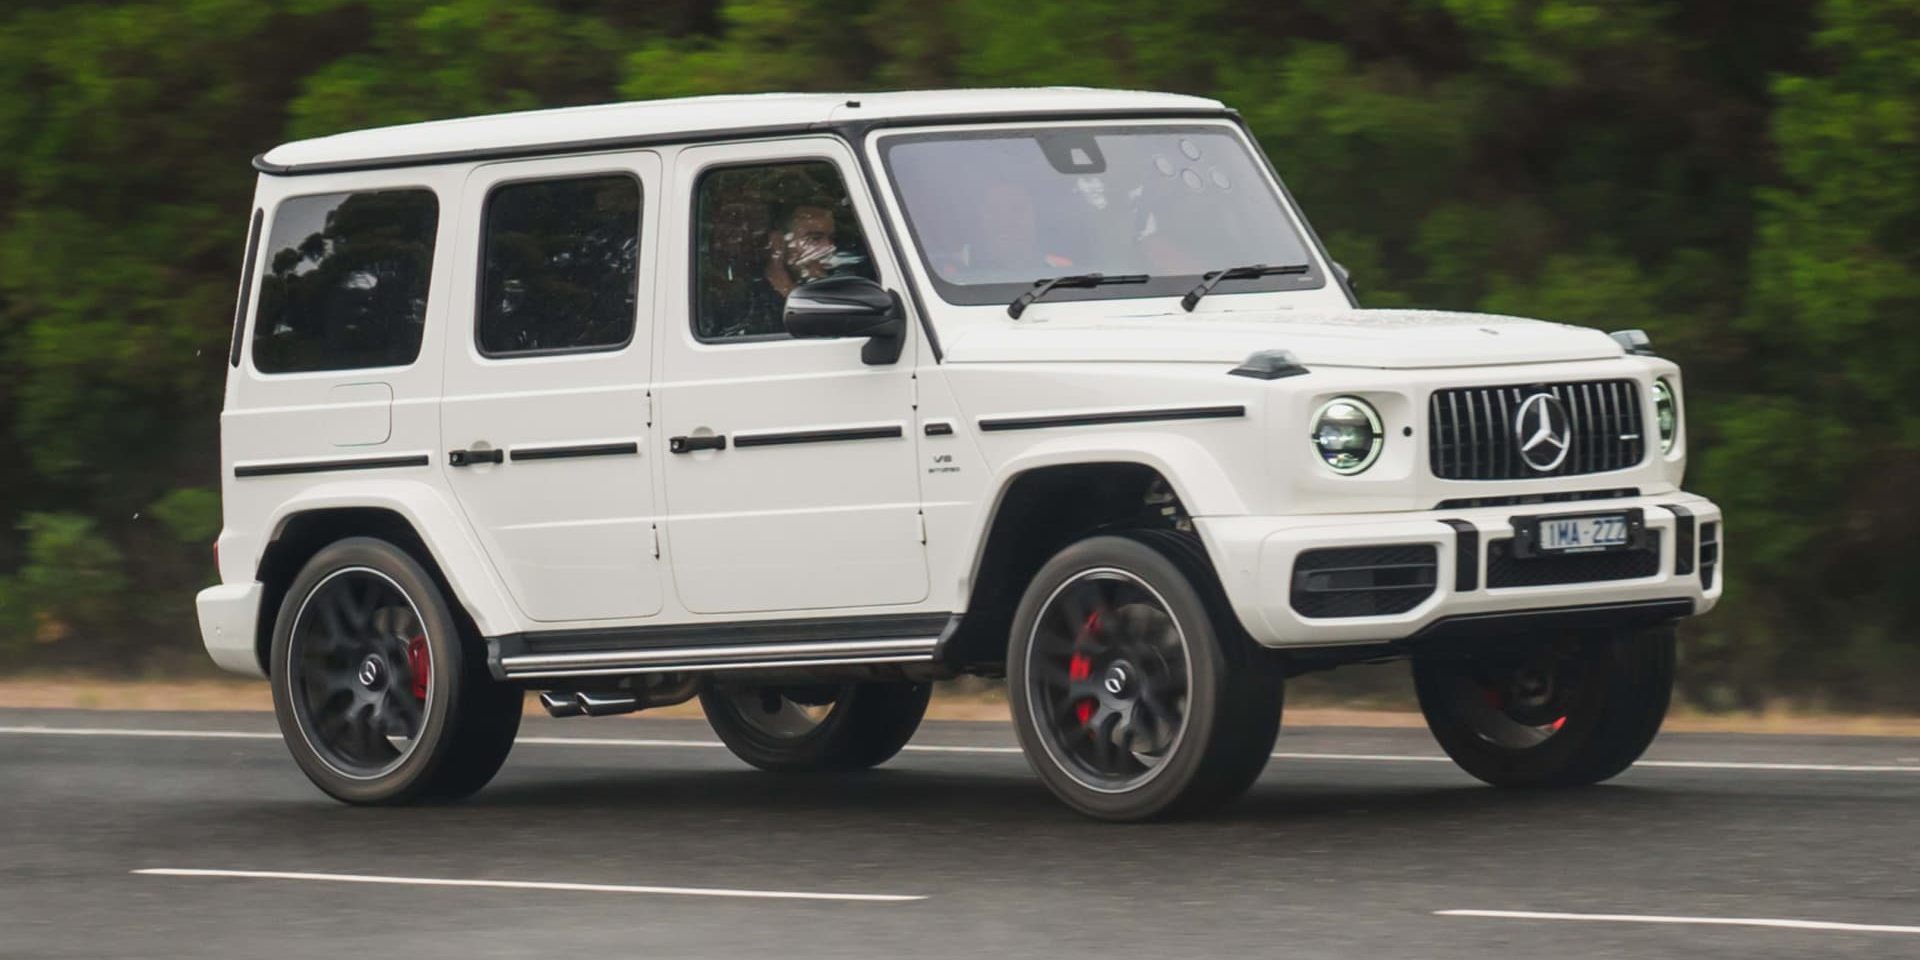 Mercedes-AMG G63 orders resume in Australia after two-year pause